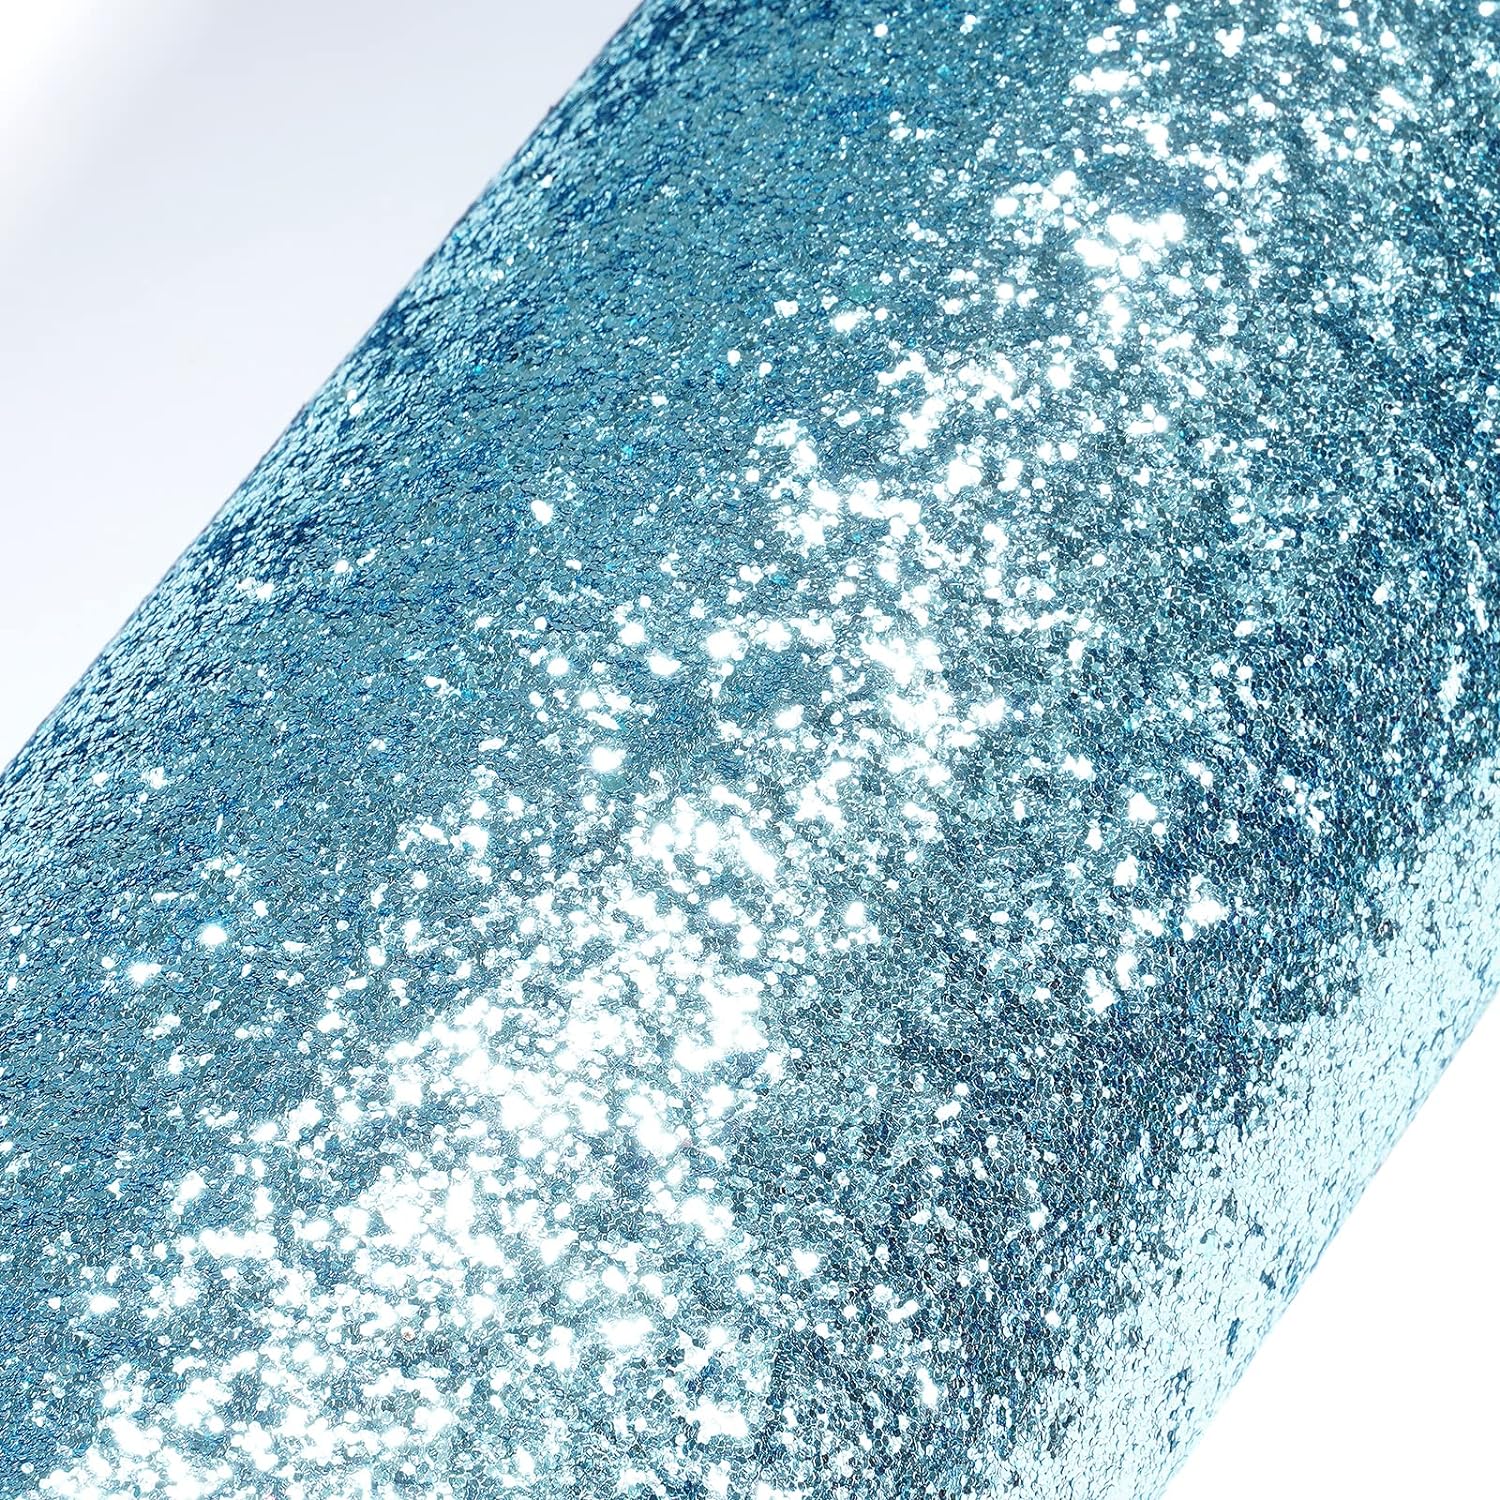 Stickyart Light Blue Chunky Glitter Wallpaper Peel and Stick Sequin Sparkle Wallpaper for Bedroom Glitter Wall Covering Self Adhesive Glitter Fabric Contact Paper for DIY Crafts Removable 15.8x78.7